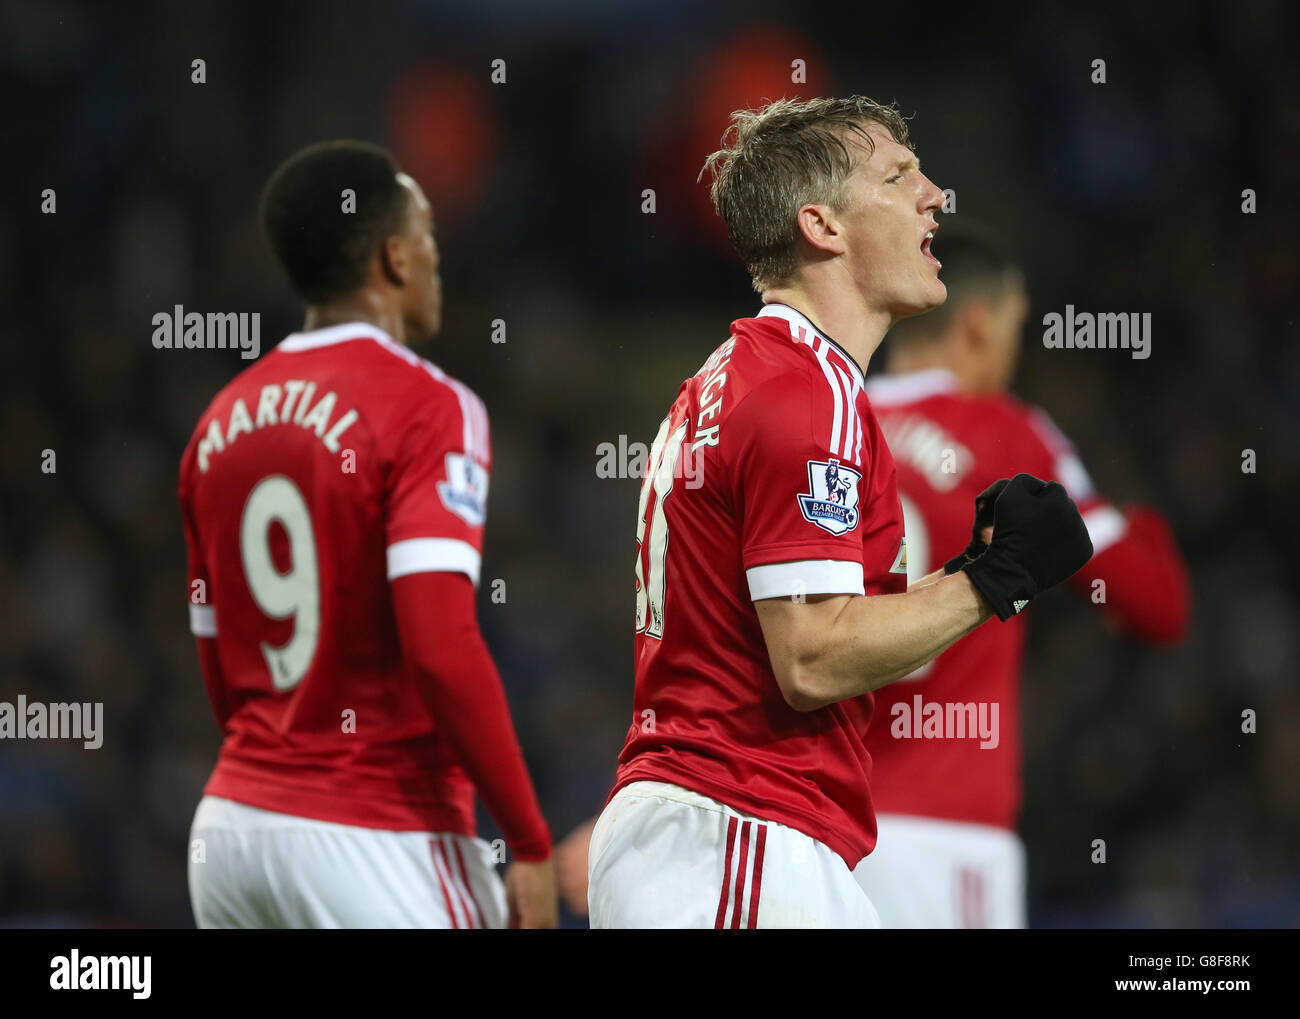 Manchester United's Bastian Schweinsteiger (right) celebrates scoring his side's first goal of the game during the Barclays Premier League match at the King Power Stadium, Leicester. Stock Photo